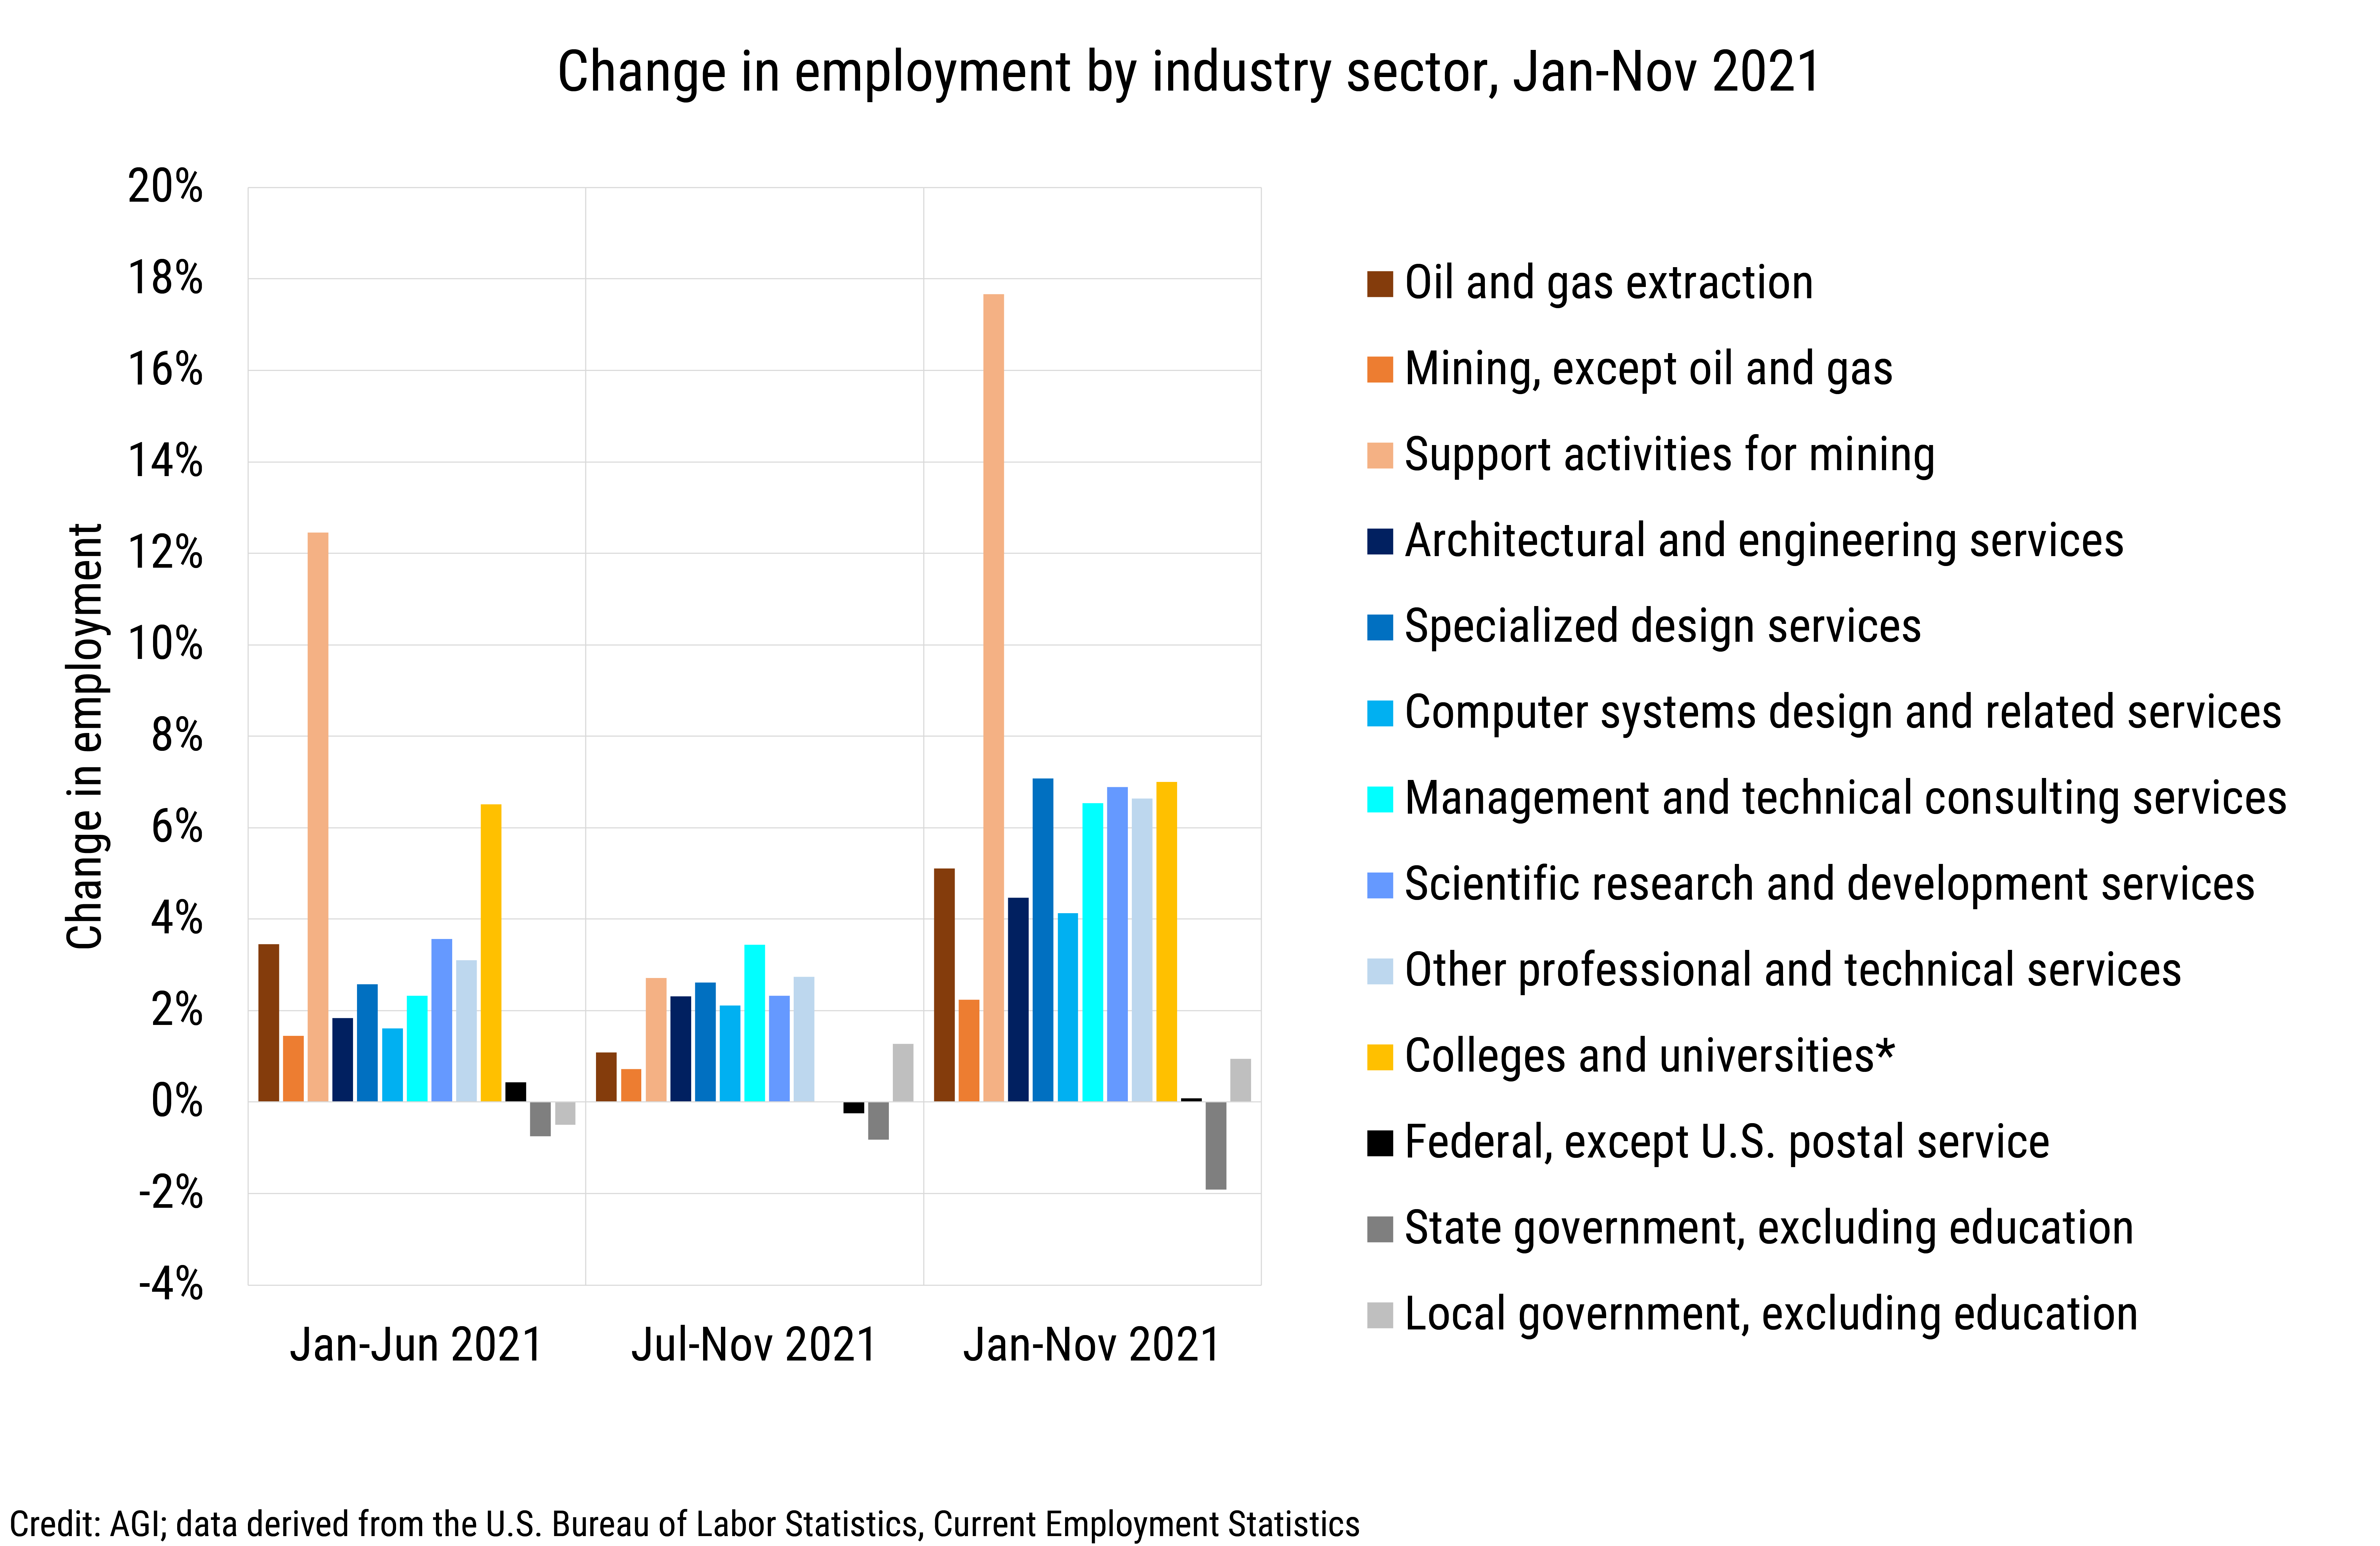 DB_2022-001 chart 05: Change in employment by industry sector, Jan-Nov 2021 (Credit: AGI; data derived from the U.S. Bureau of Labor Statistics, Current Employment Statistics)